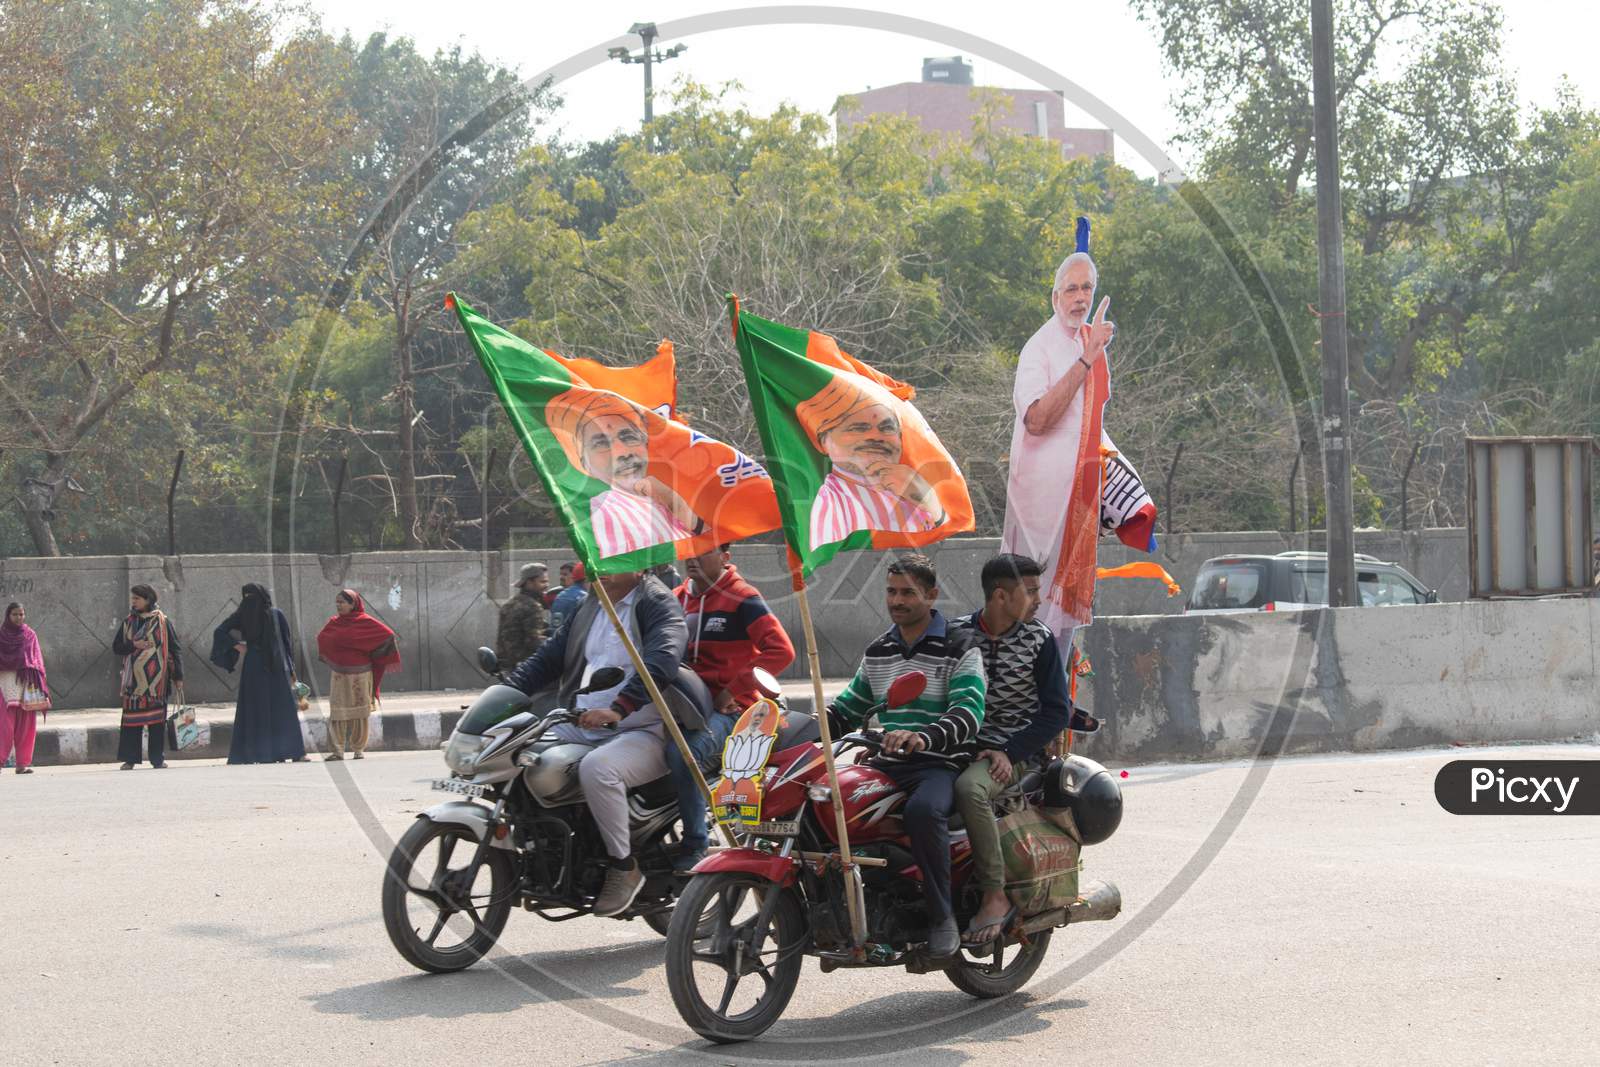 Men riding bike with BJP Flags during Bharatiya Janata Party campaign for Delhi Assembly Election 2020